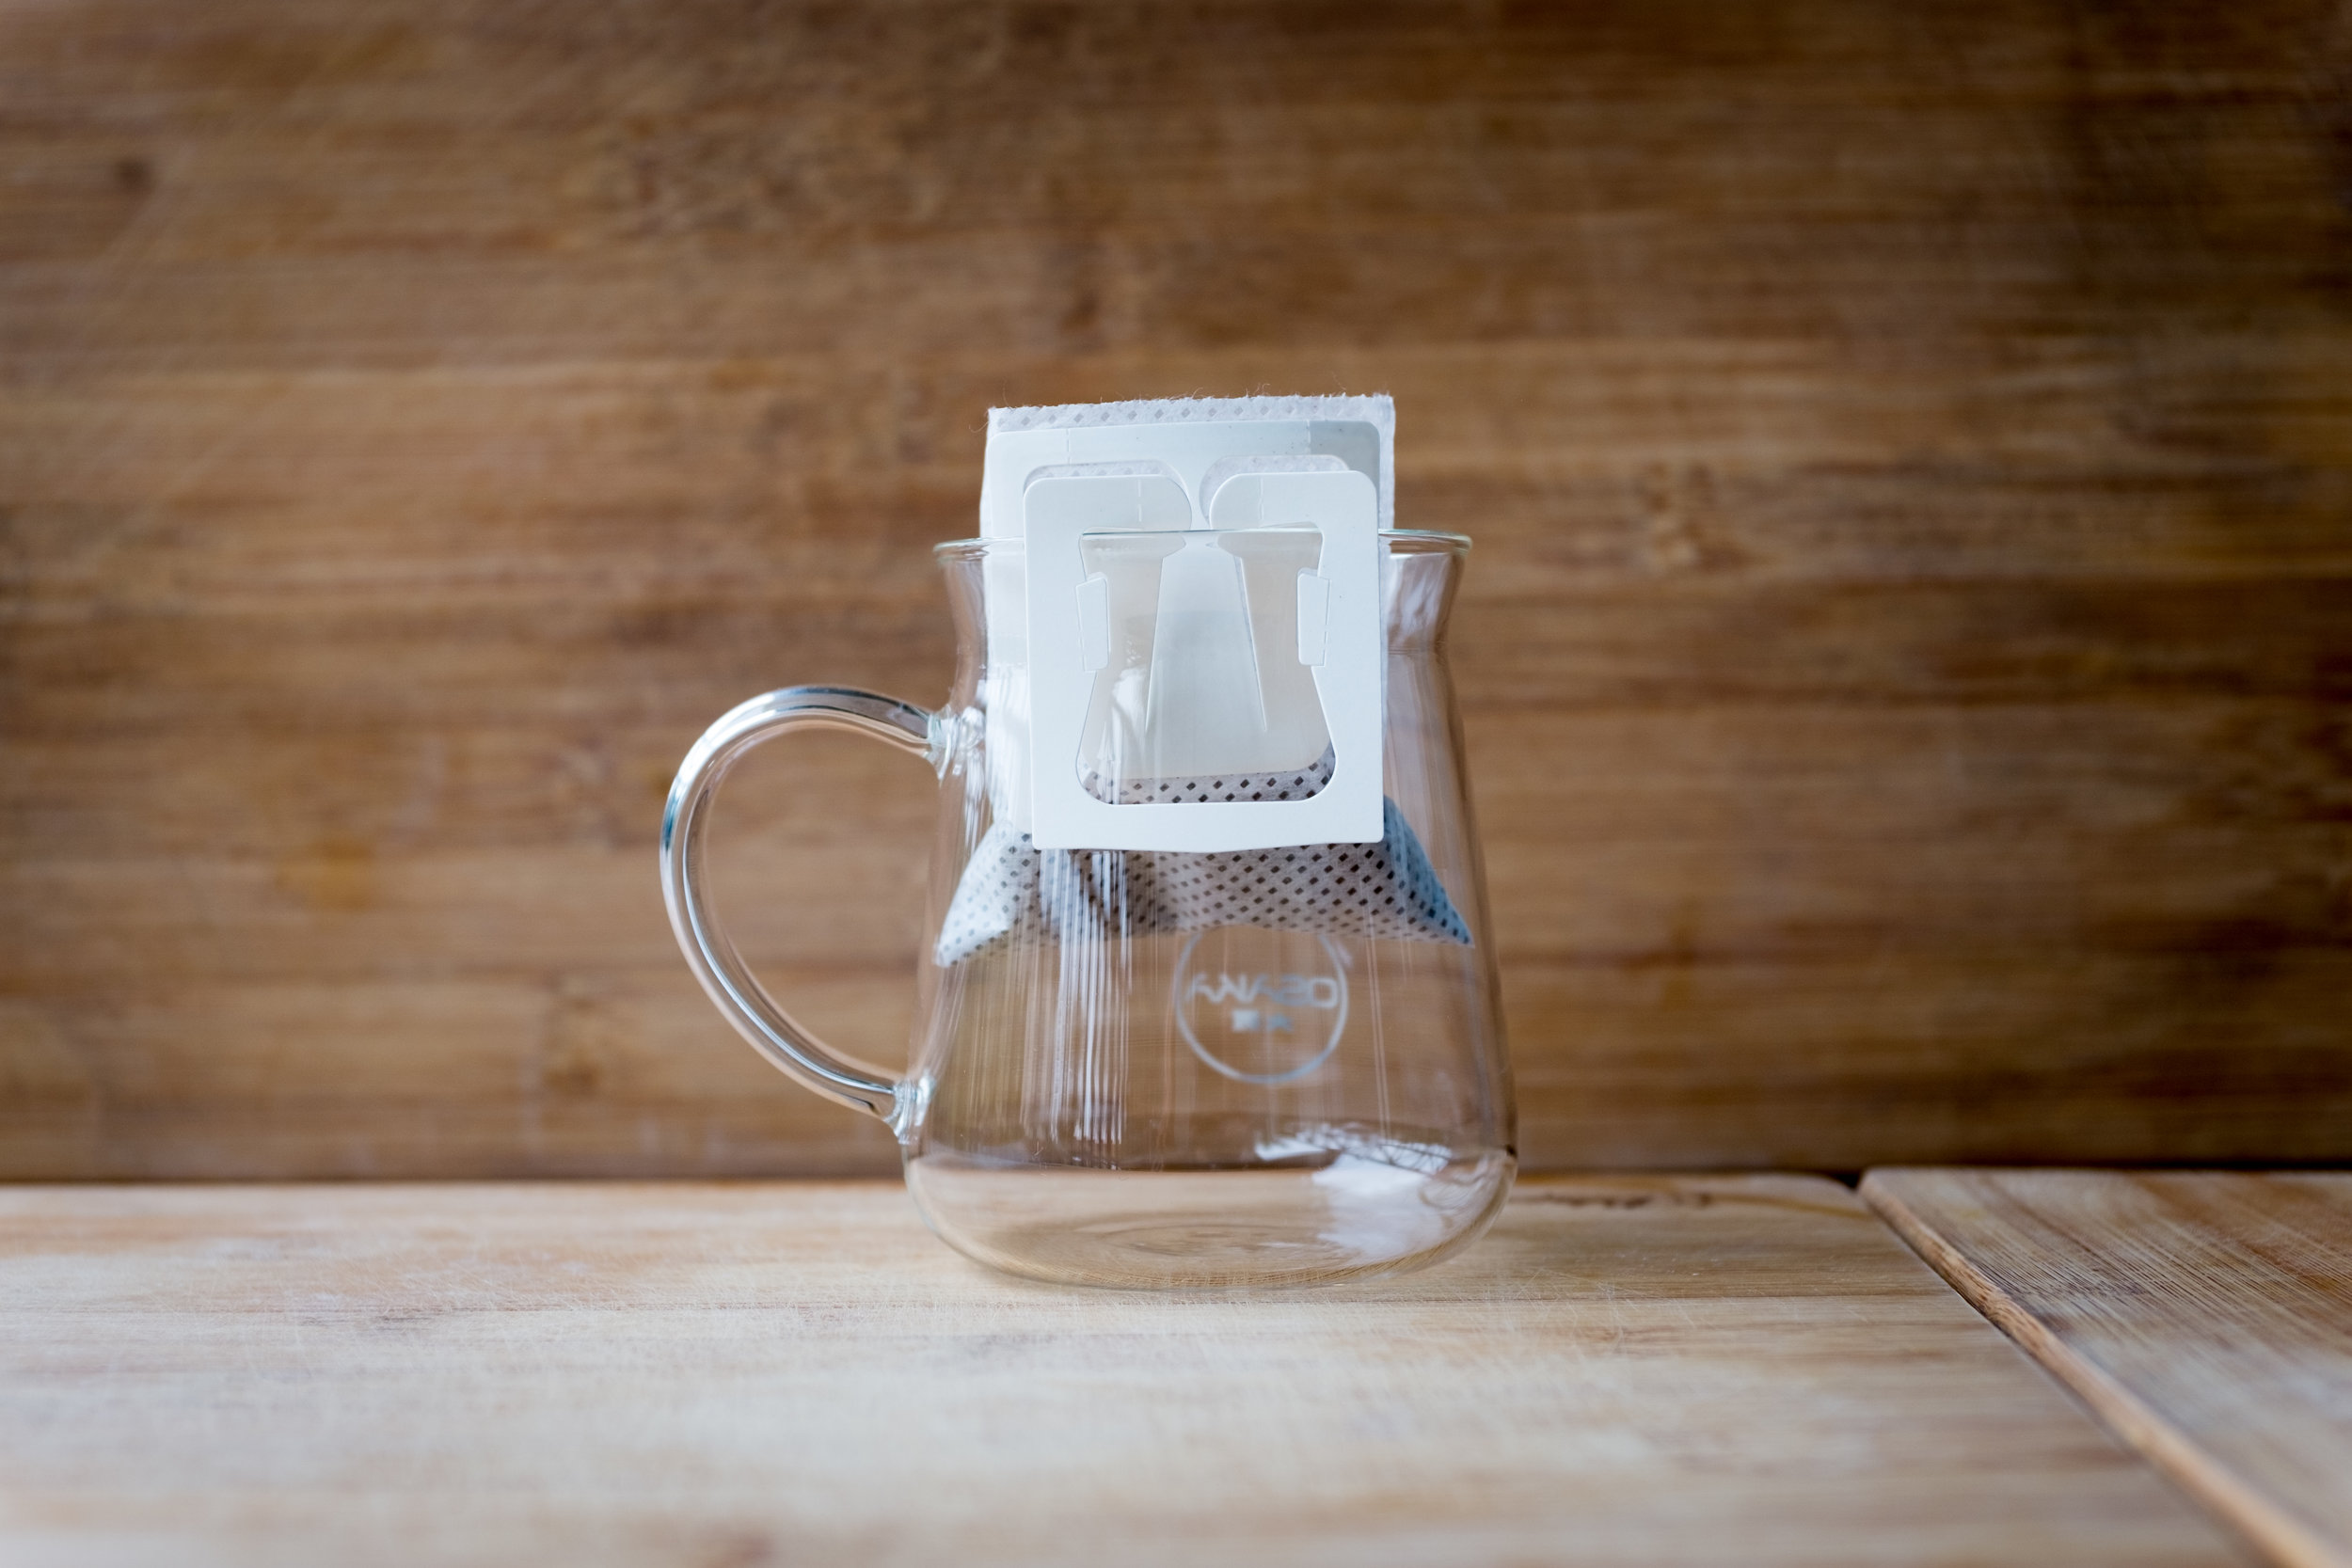 kipsy-drip-bag-pourover-coffee-filter-pouch-1